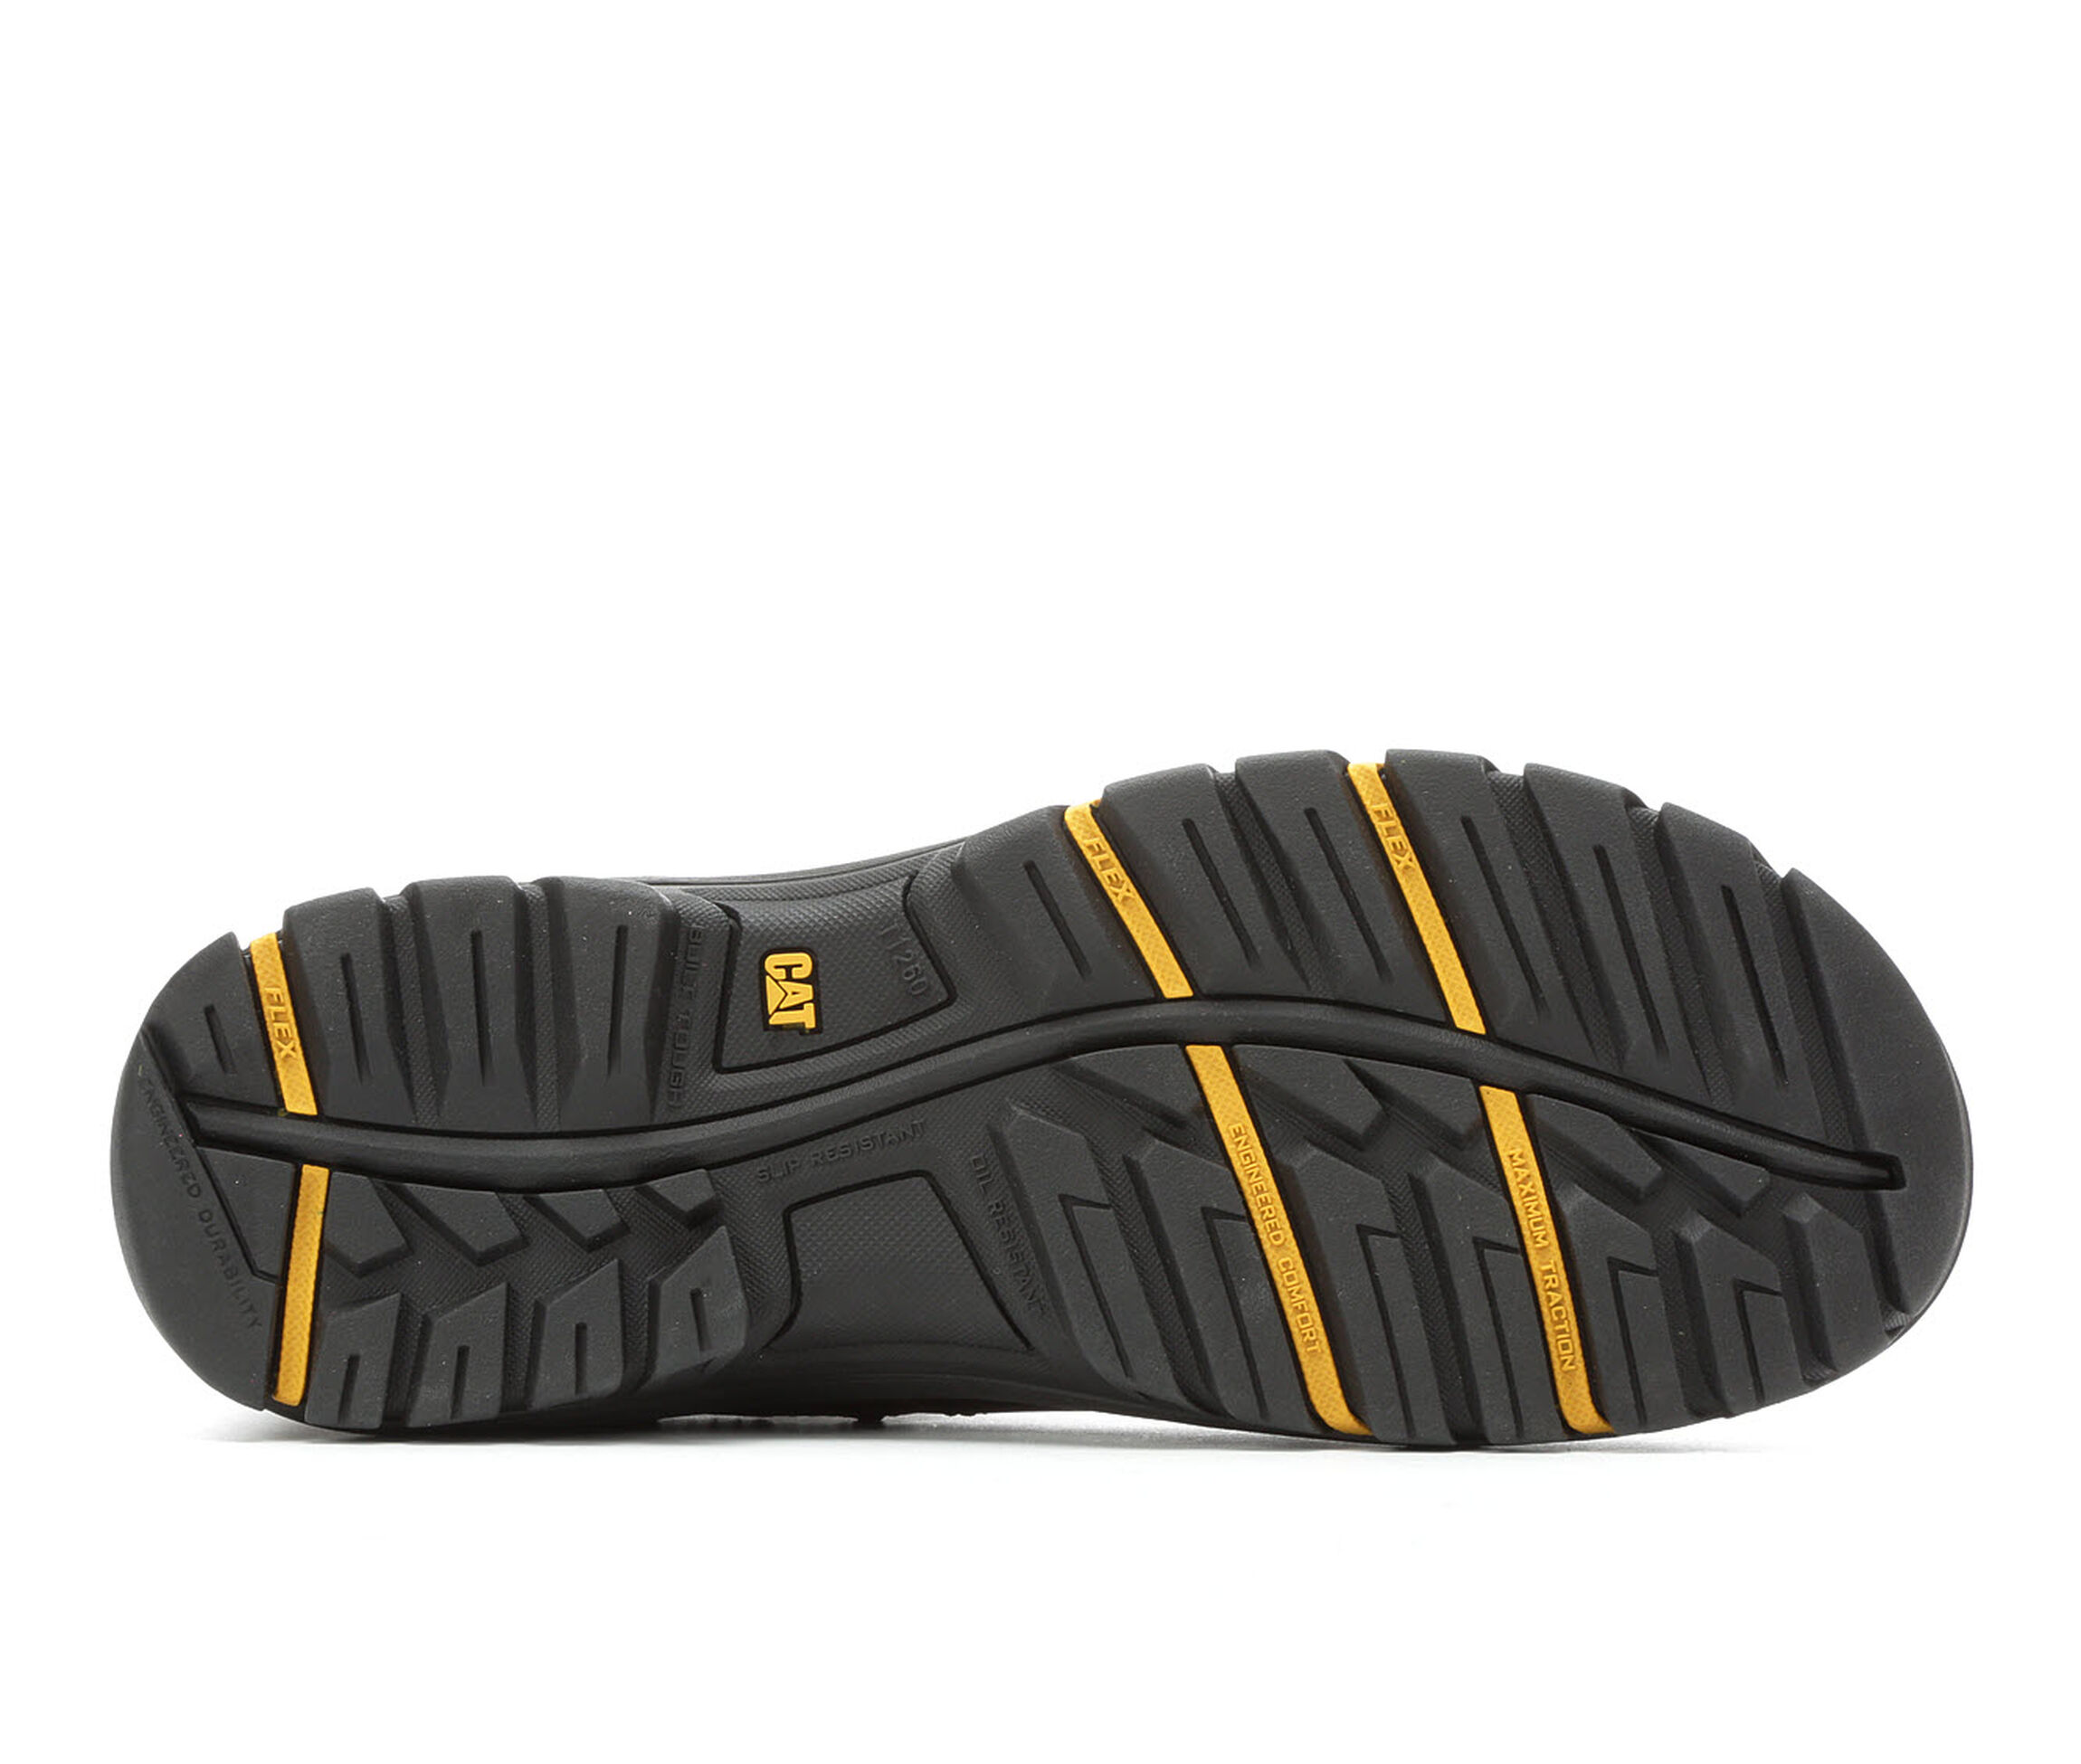 Caterpillar Work Boots & Shoes | Shoe Carnival